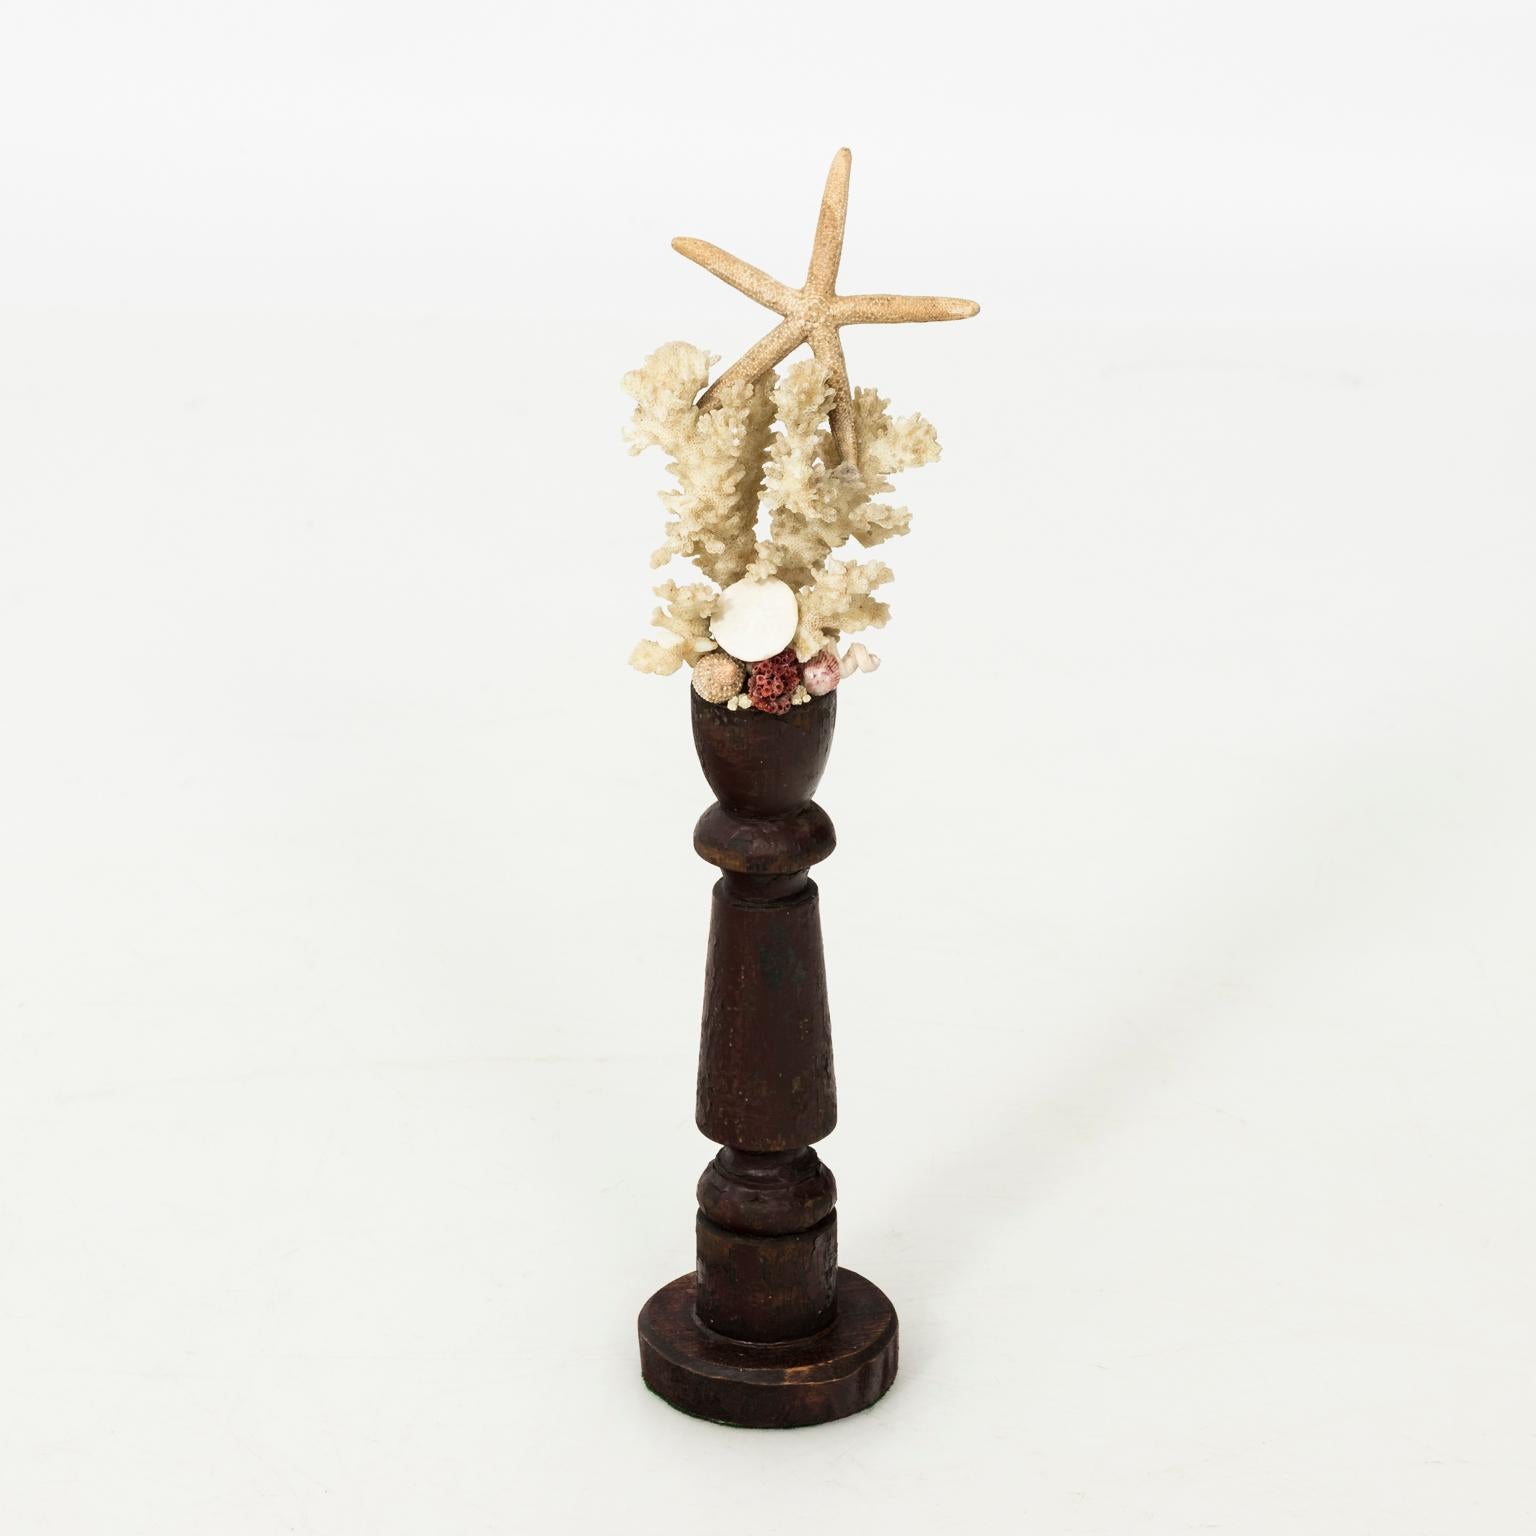 Set of six collection of nautical shells and specimens of coral on wood turned stands, circa 20th century. Crafted by local New England artisan. The sizes of each piece are: 16.00 inches height by 3.25 inches wide; 14.00 inches height by 2.75 inches